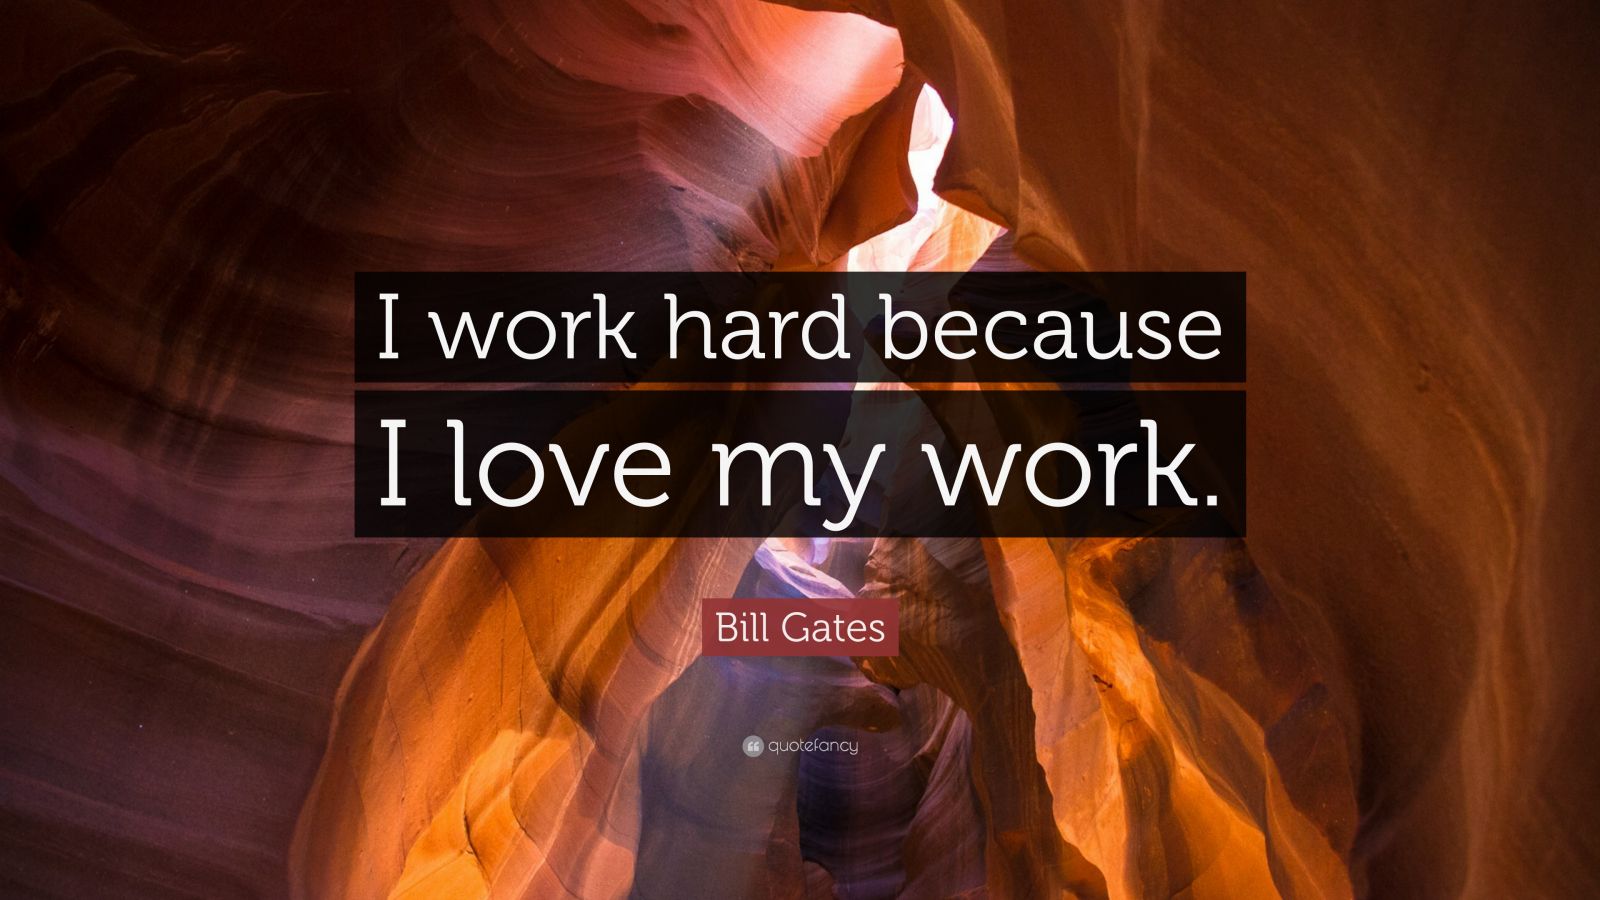 Bill Gates Quote: “I work hard because I love my work.” (12 wallpapers ...